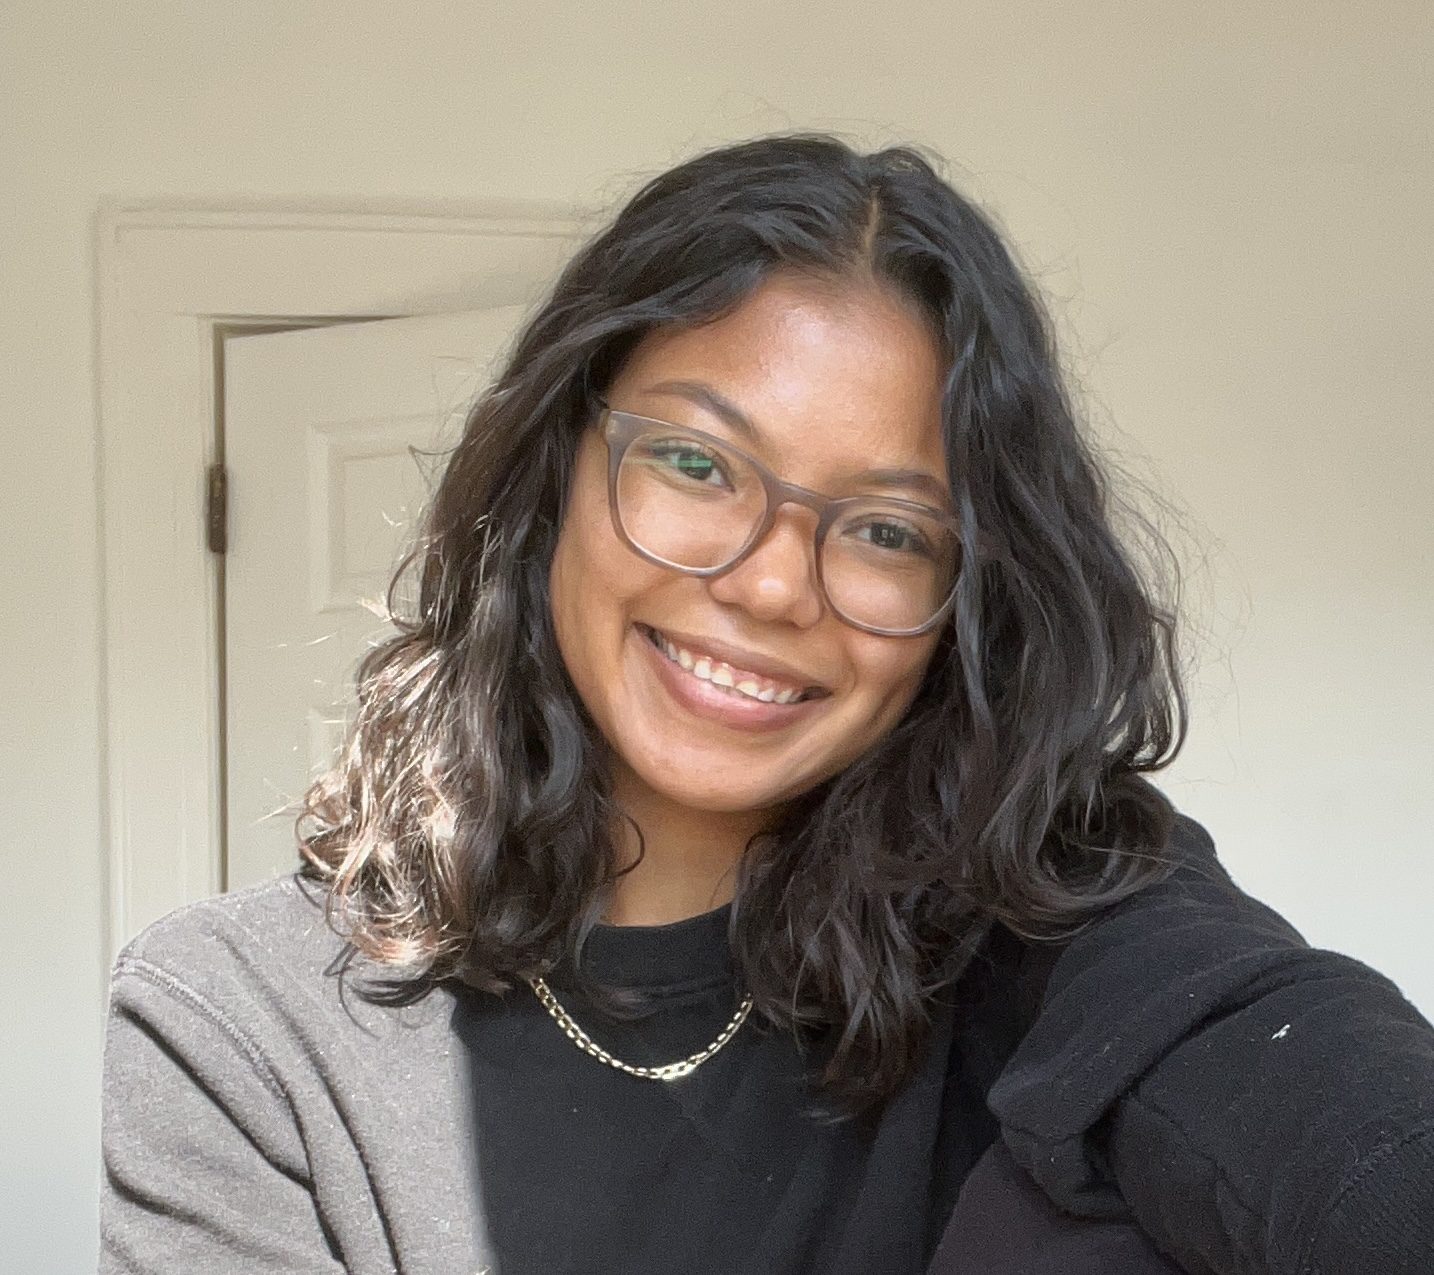 A smiling person with wavy sholder length brown hair, glasses, a black sweatshirt and sliver chain necklace, against a cream colored door.